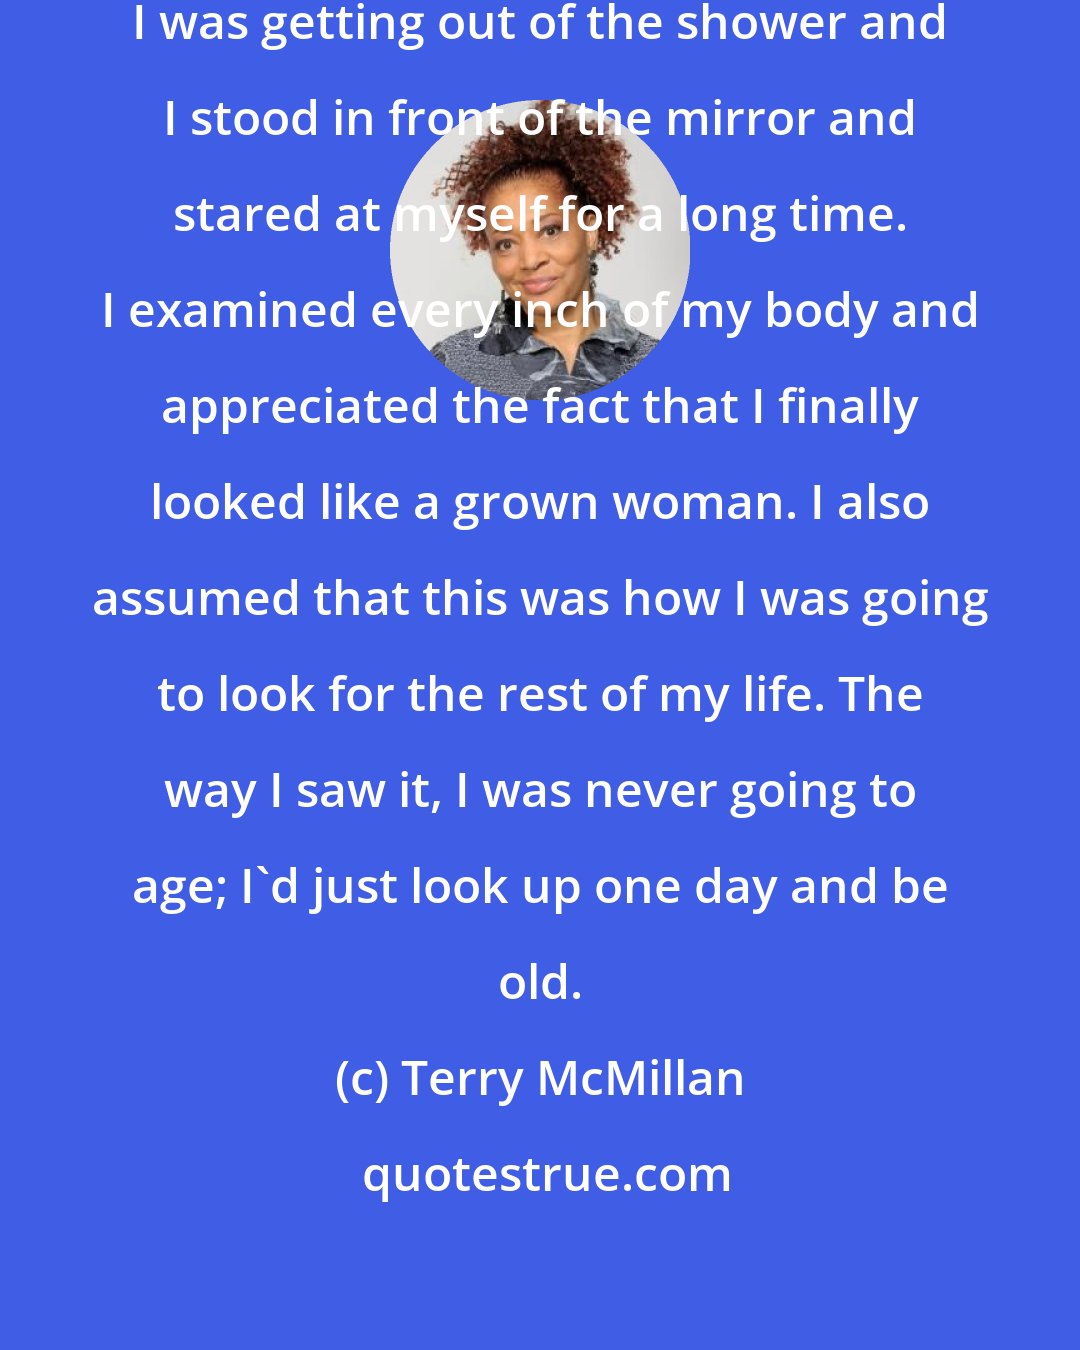 Terry McMillan: I remember the day I turned thirty. I was getting out of the shower and I stood in front of the mirror and stared at myself for a long time. I examined every inch of my body and appreciated the fact that I finally looked like a grown woman. I also assumed that this was how I was going to look for the rest of my life. The way I saw it, I was never going to age; I'd just look up one day and be old.